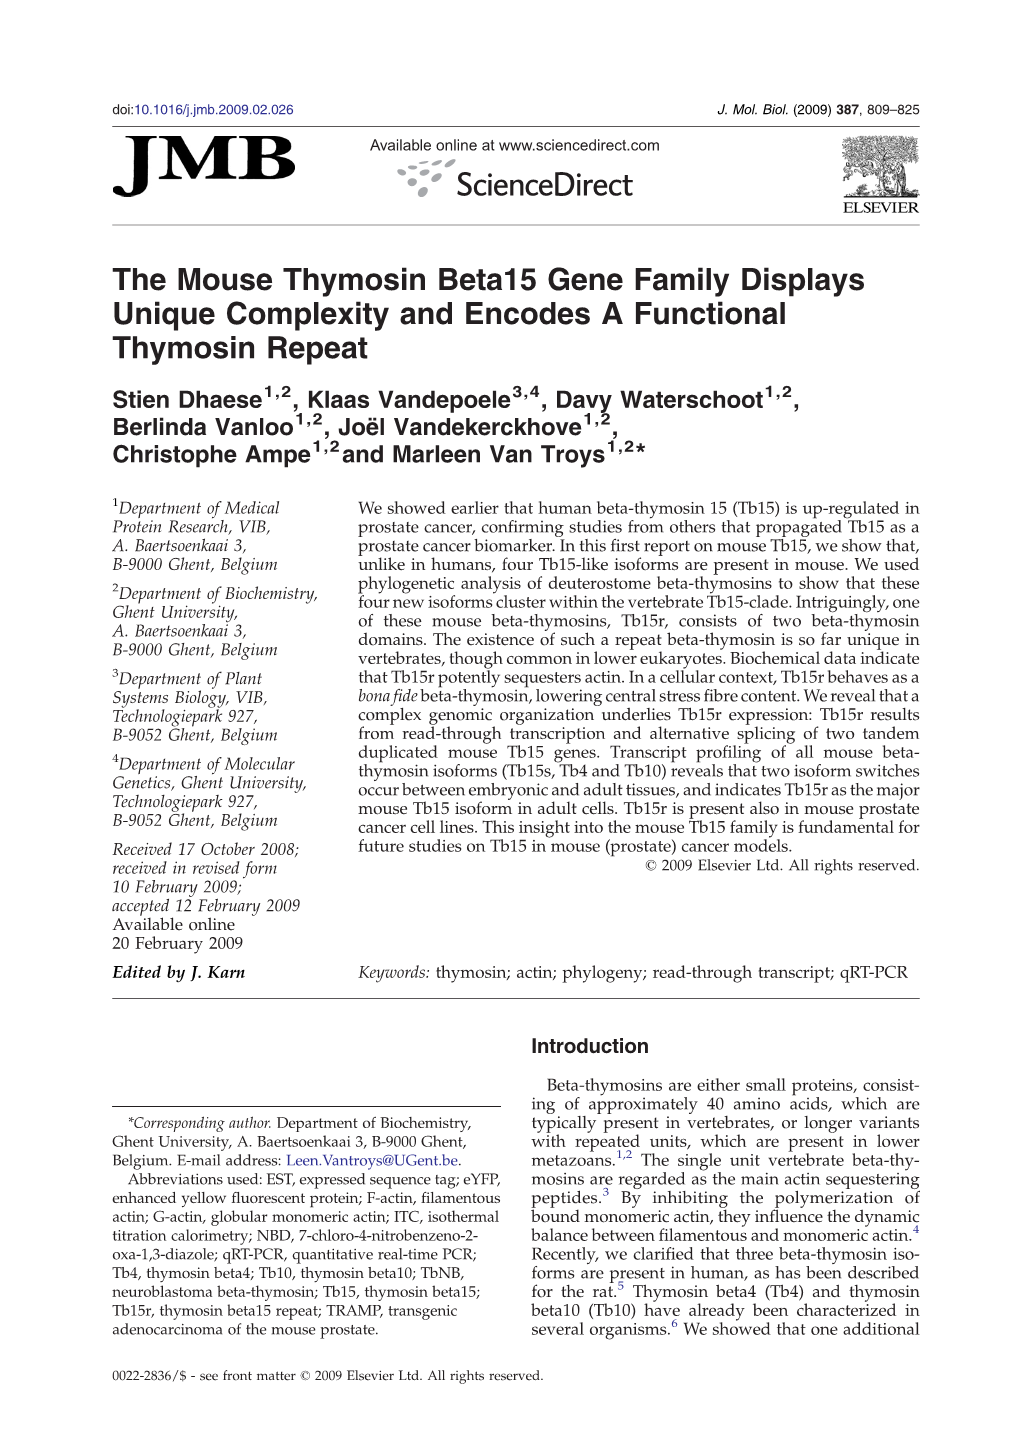 The Mouse Thymosin Beta15 Gene Family Displays Unique Complexity and Encodes a Functional Thymosin Repeat